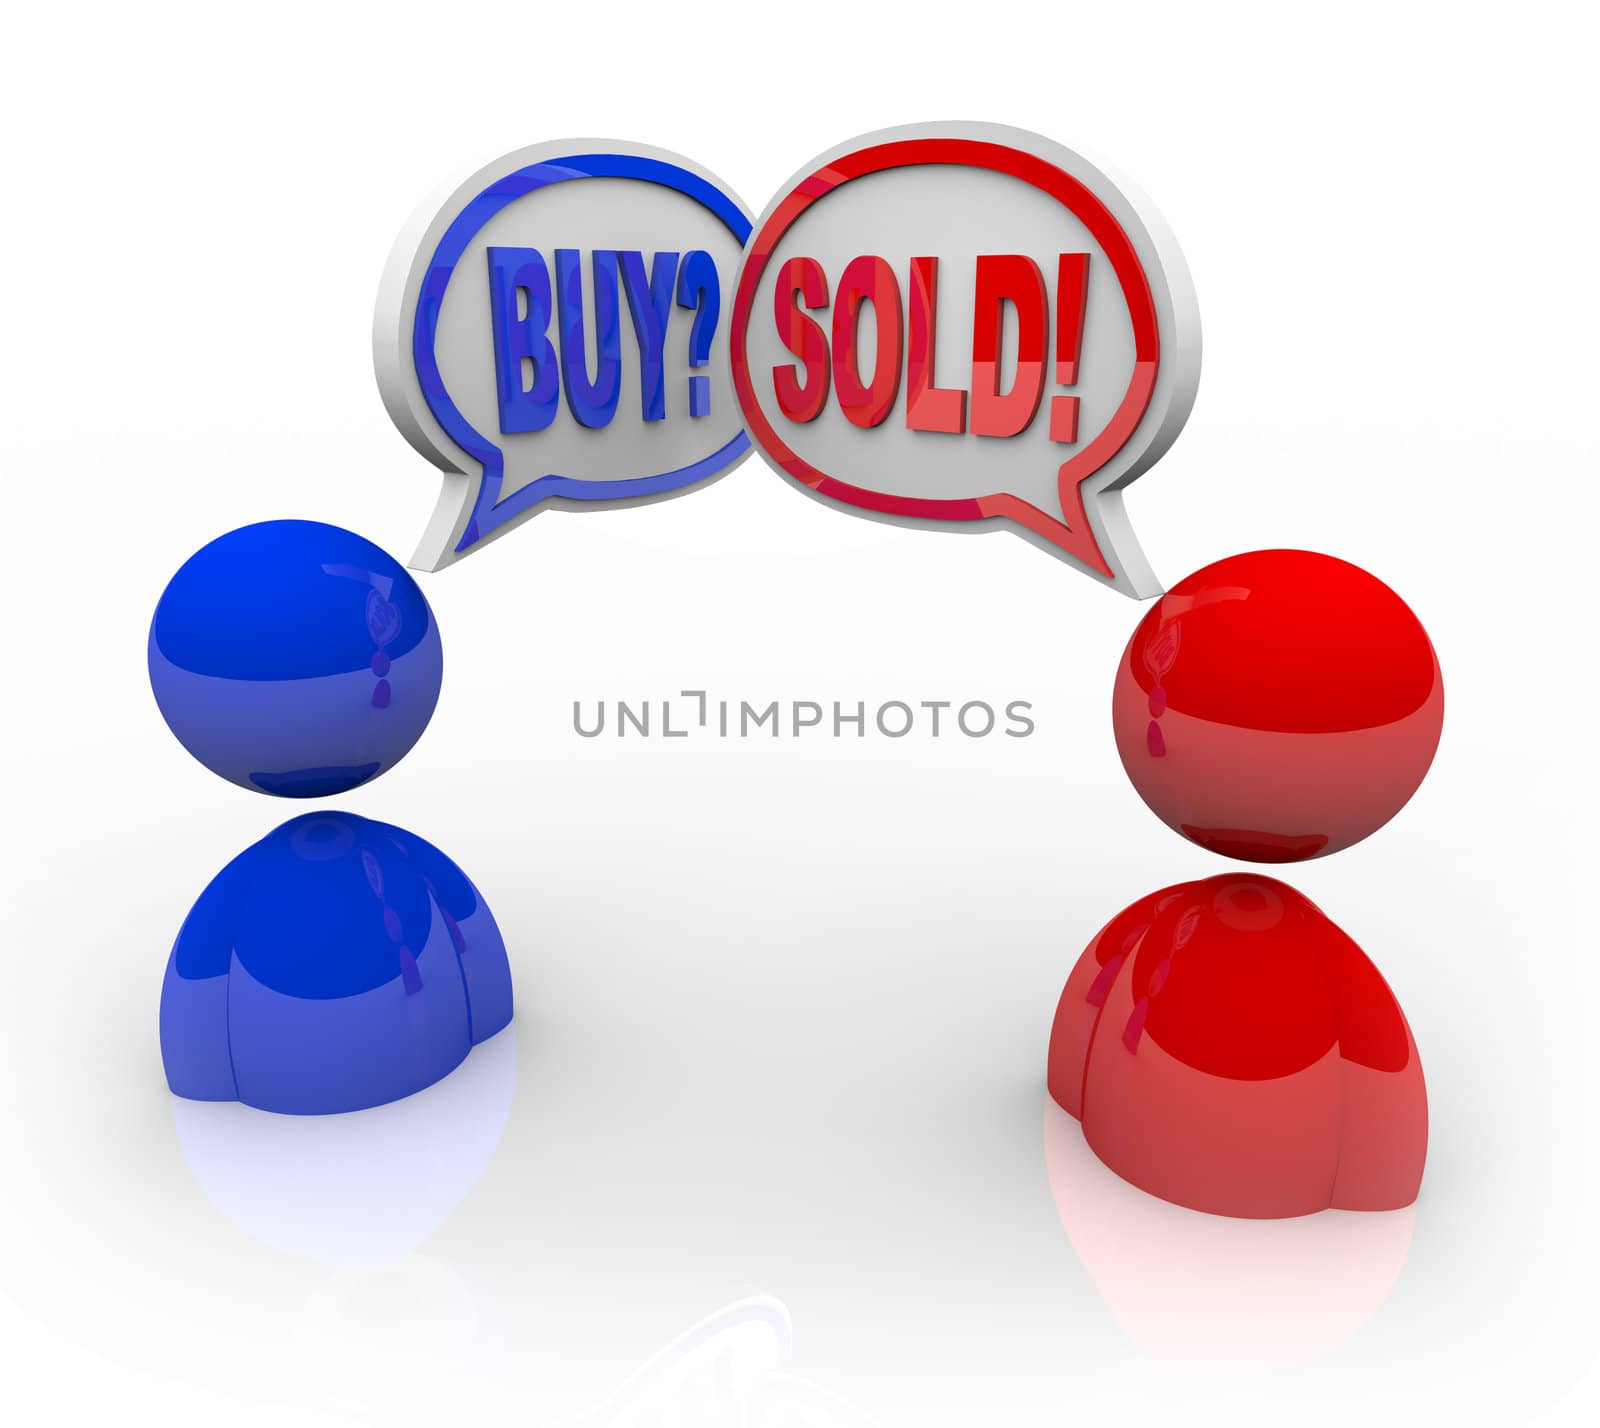 Buy and Sold Speech Bubbles Business People Deal and Transaction by iQoncept